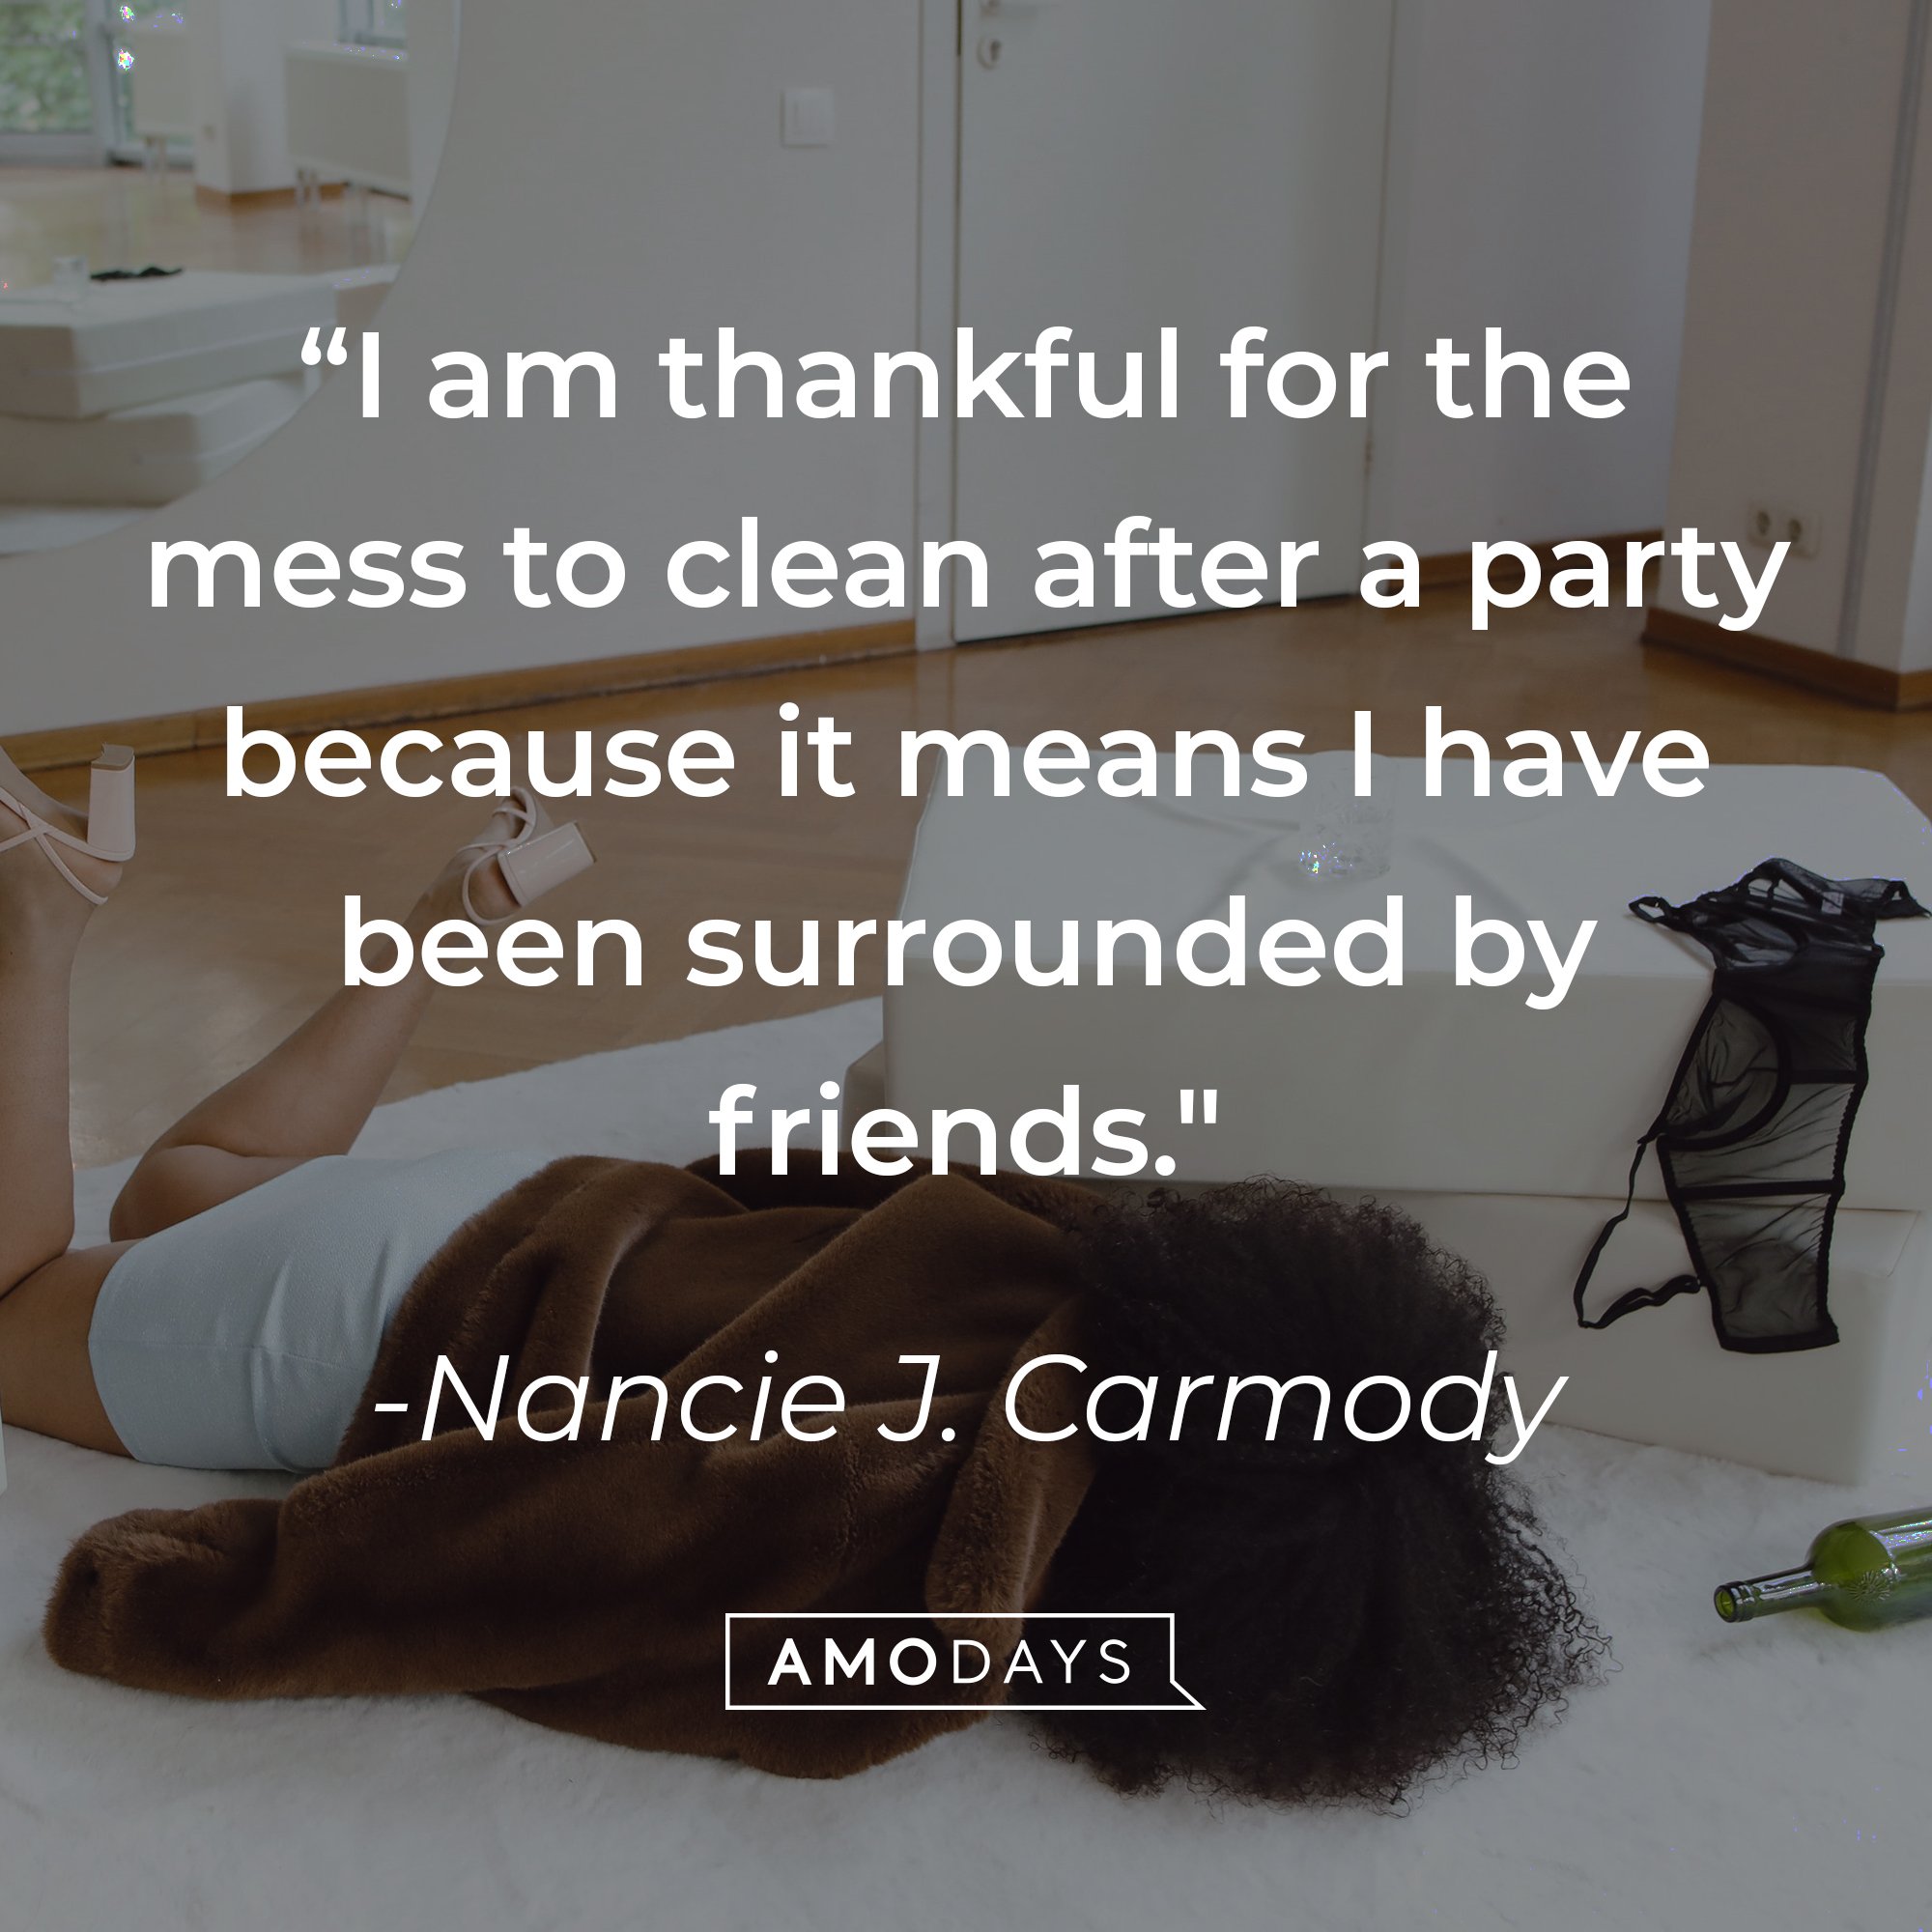 Nancie J. Carmody's quote:  "I am thankful for the mess to clean after a party because it means I have been surrounded by friends." | Image: AmoDays